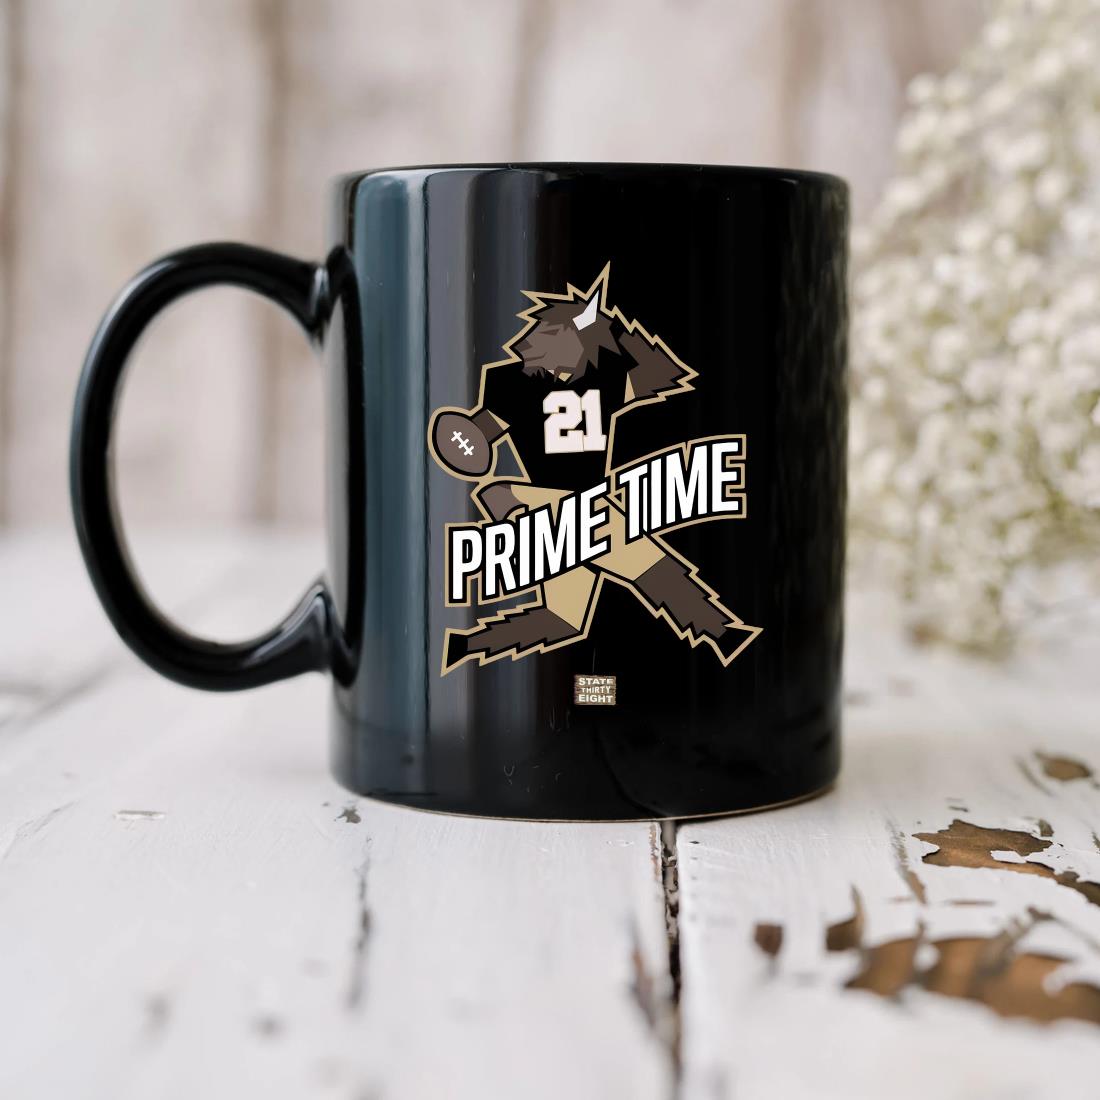 Official Prime Time 21 State Thirty Eight Mug